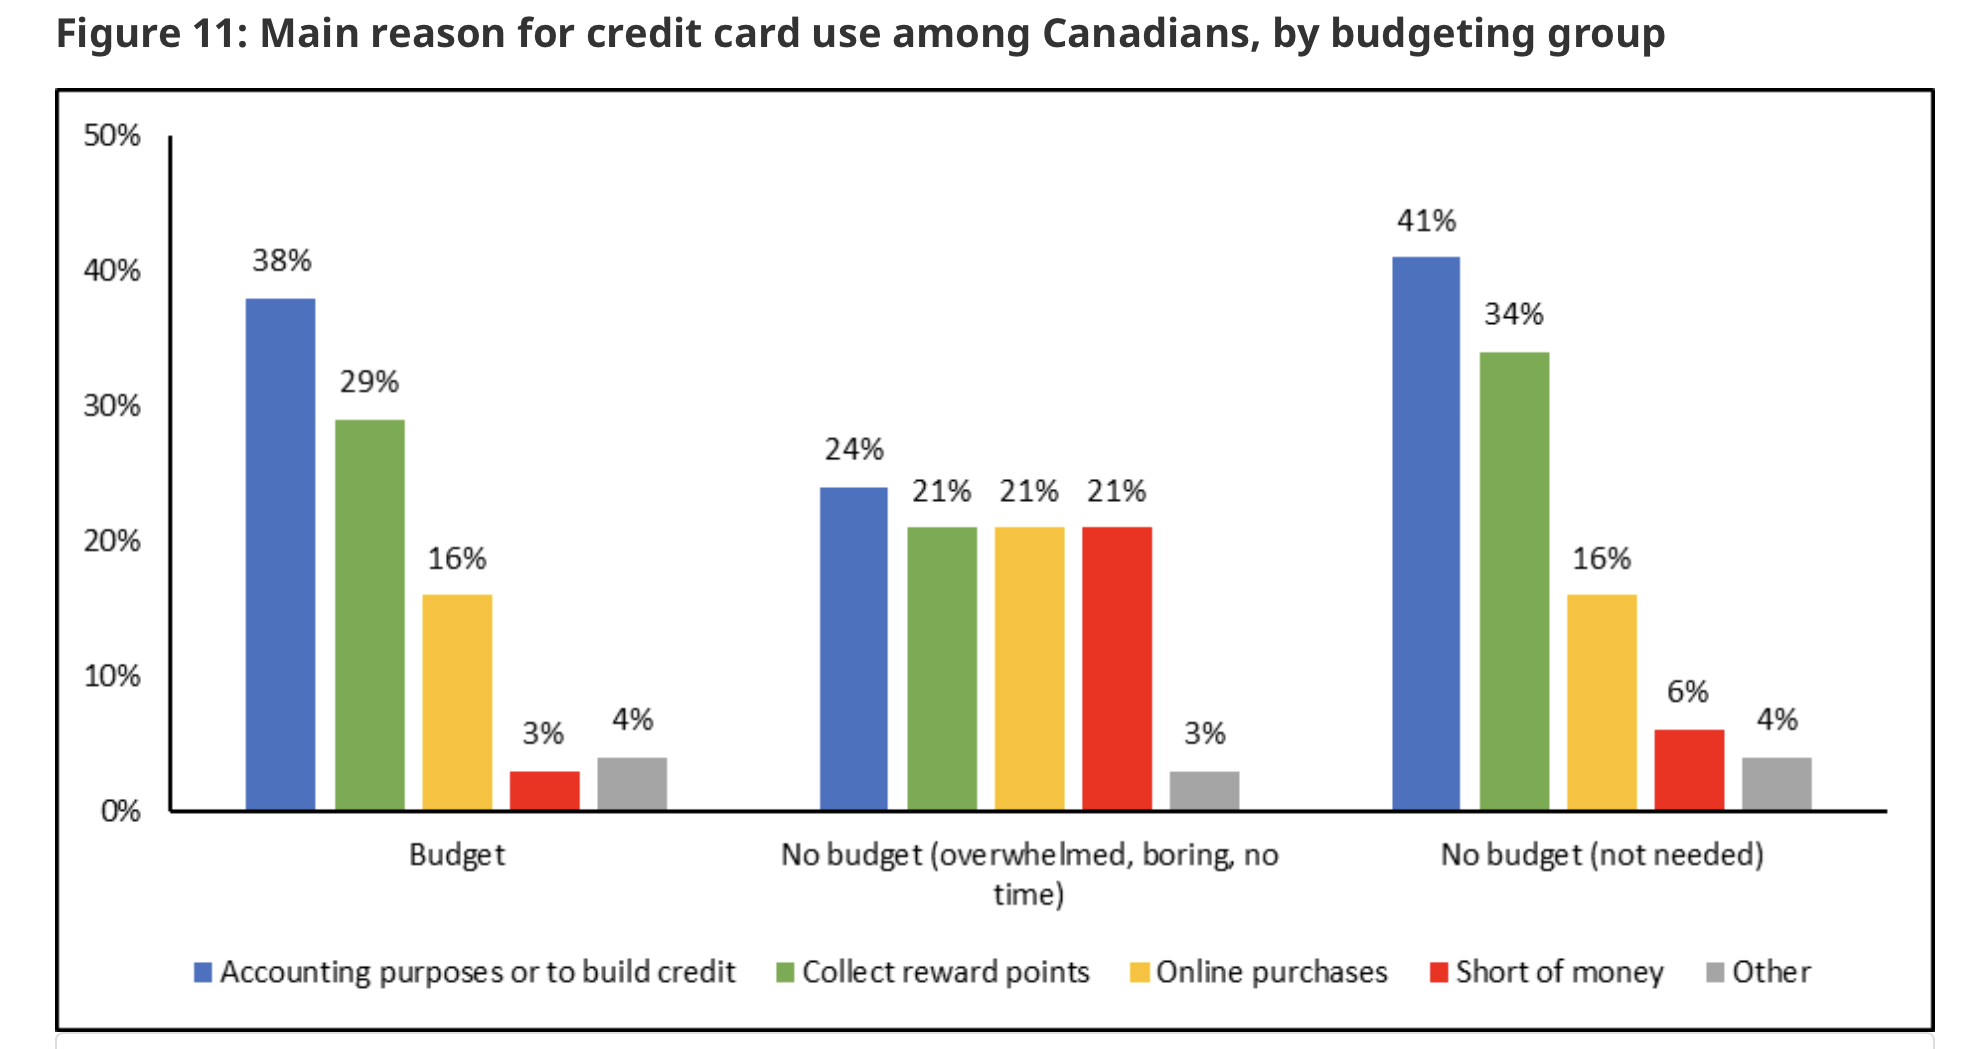 _images/ccard-budget.png